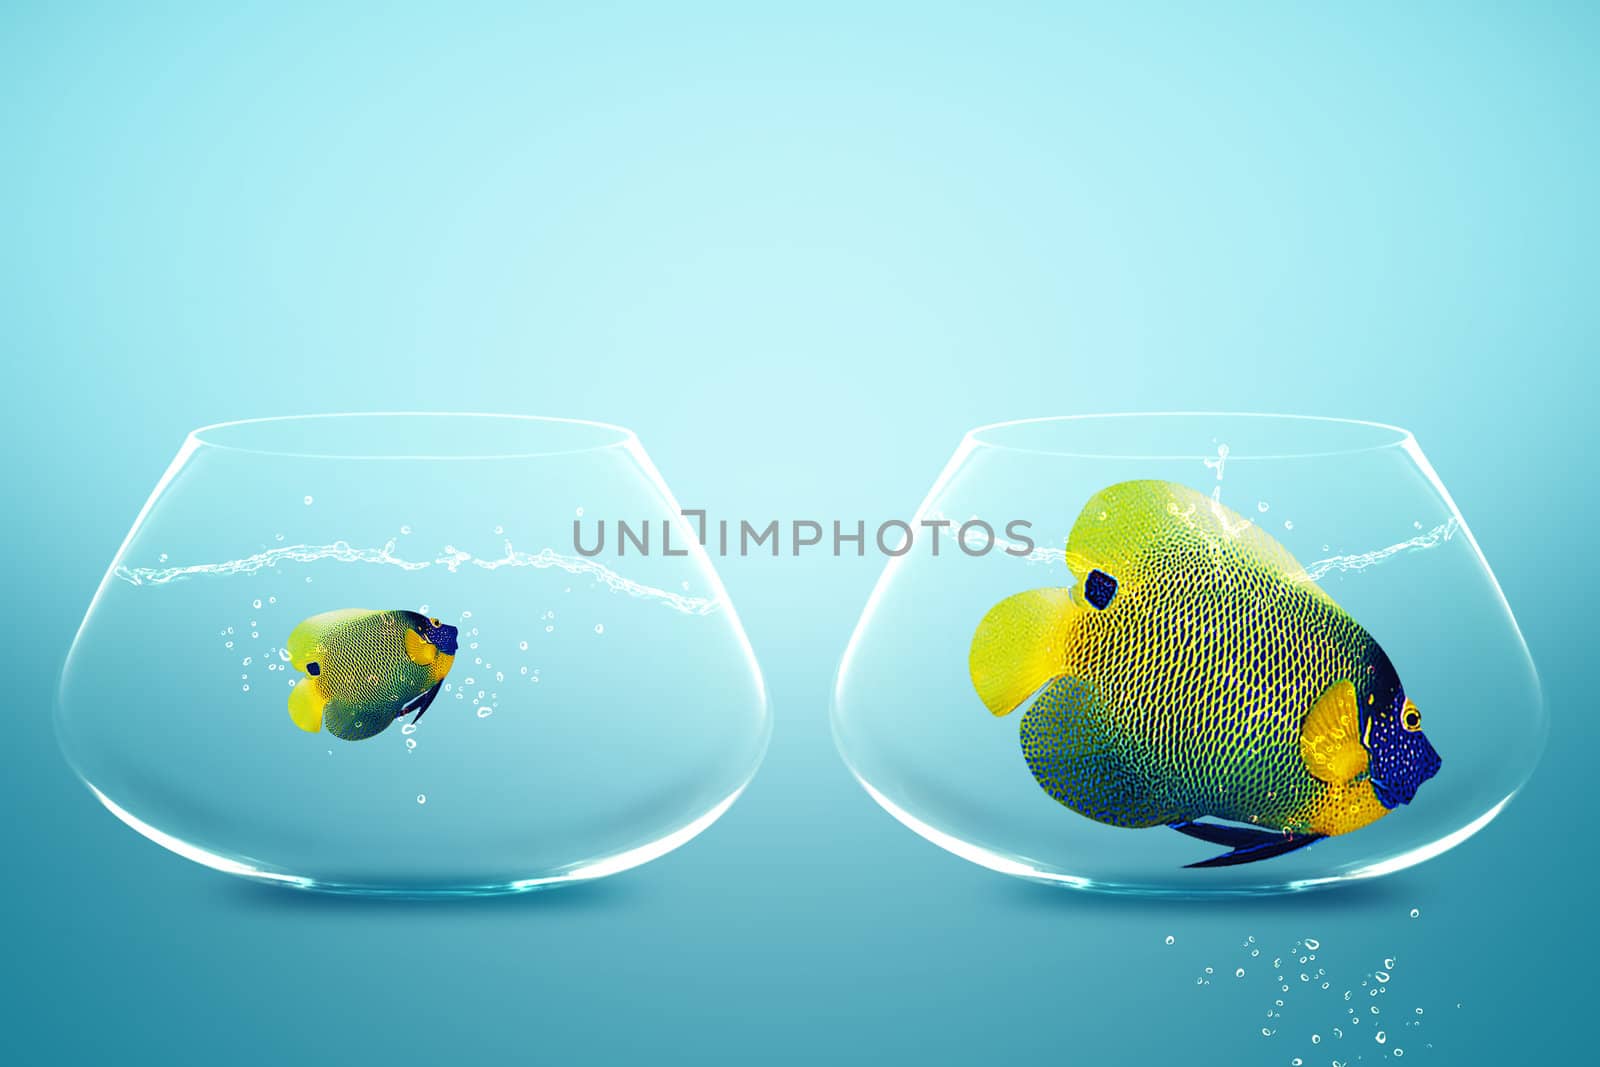 Large and small angelfish by designsstock